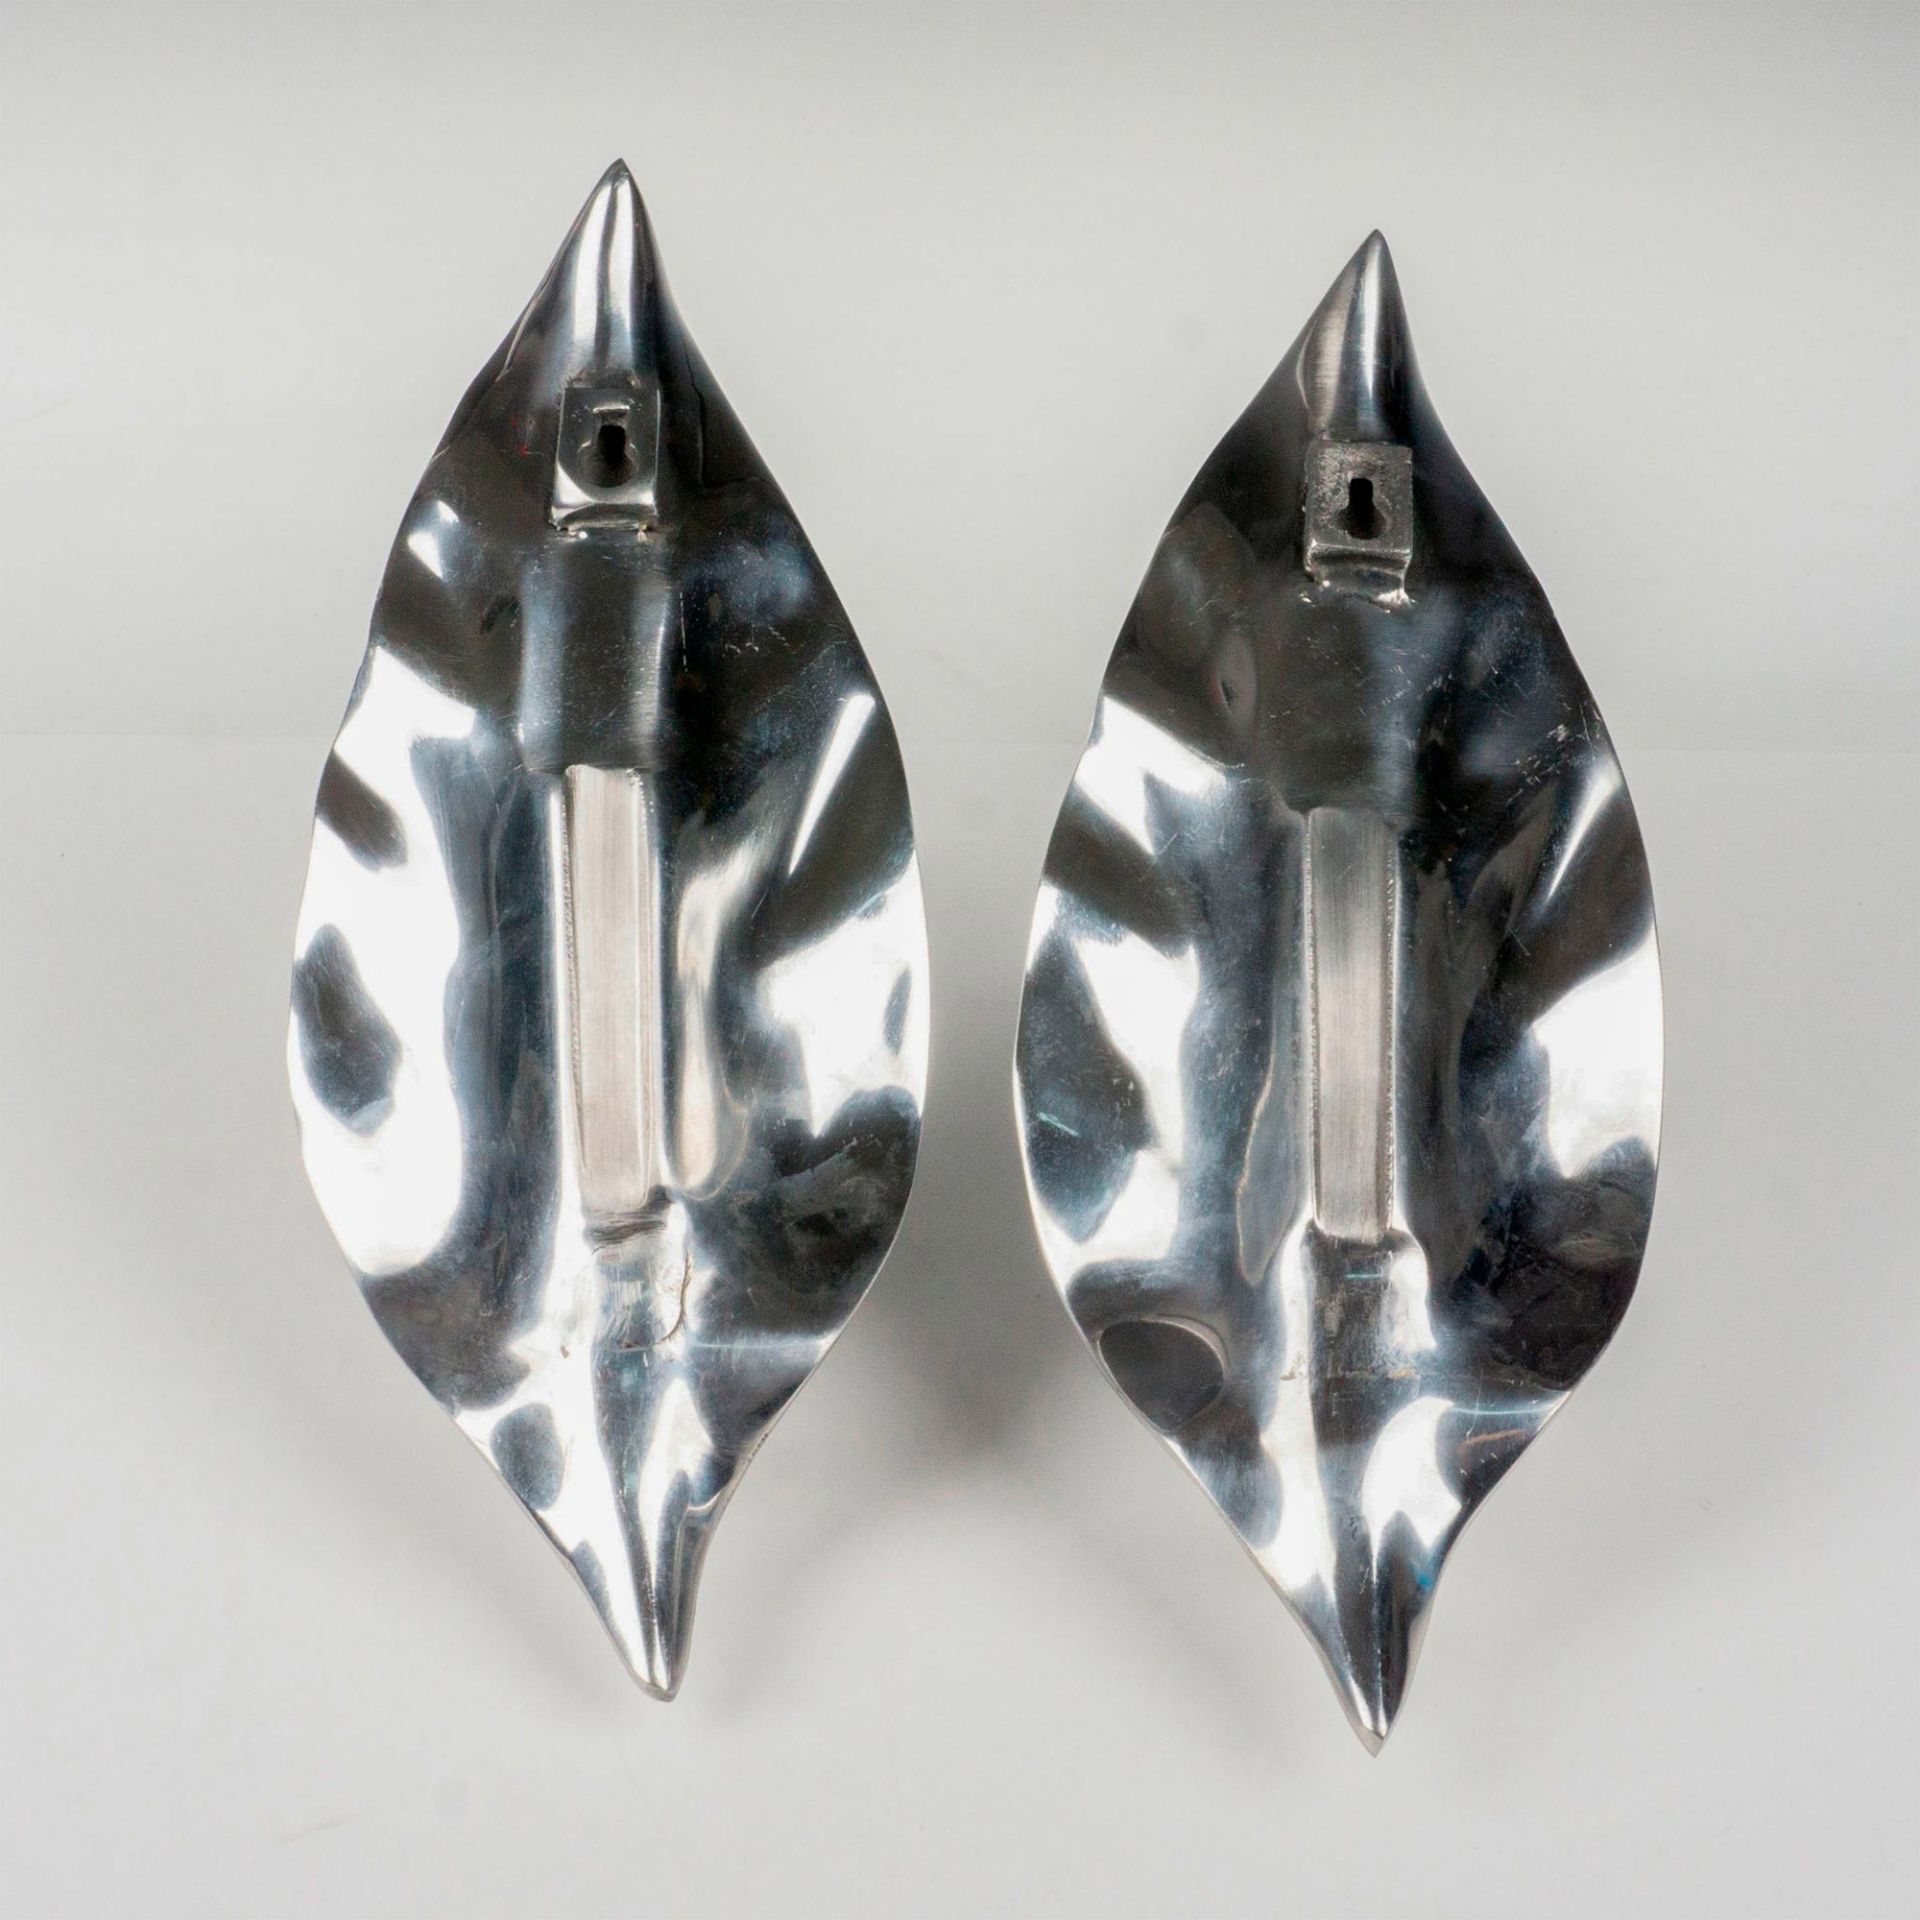 Pair of Metal Wall Sconces - Image 2 of 2